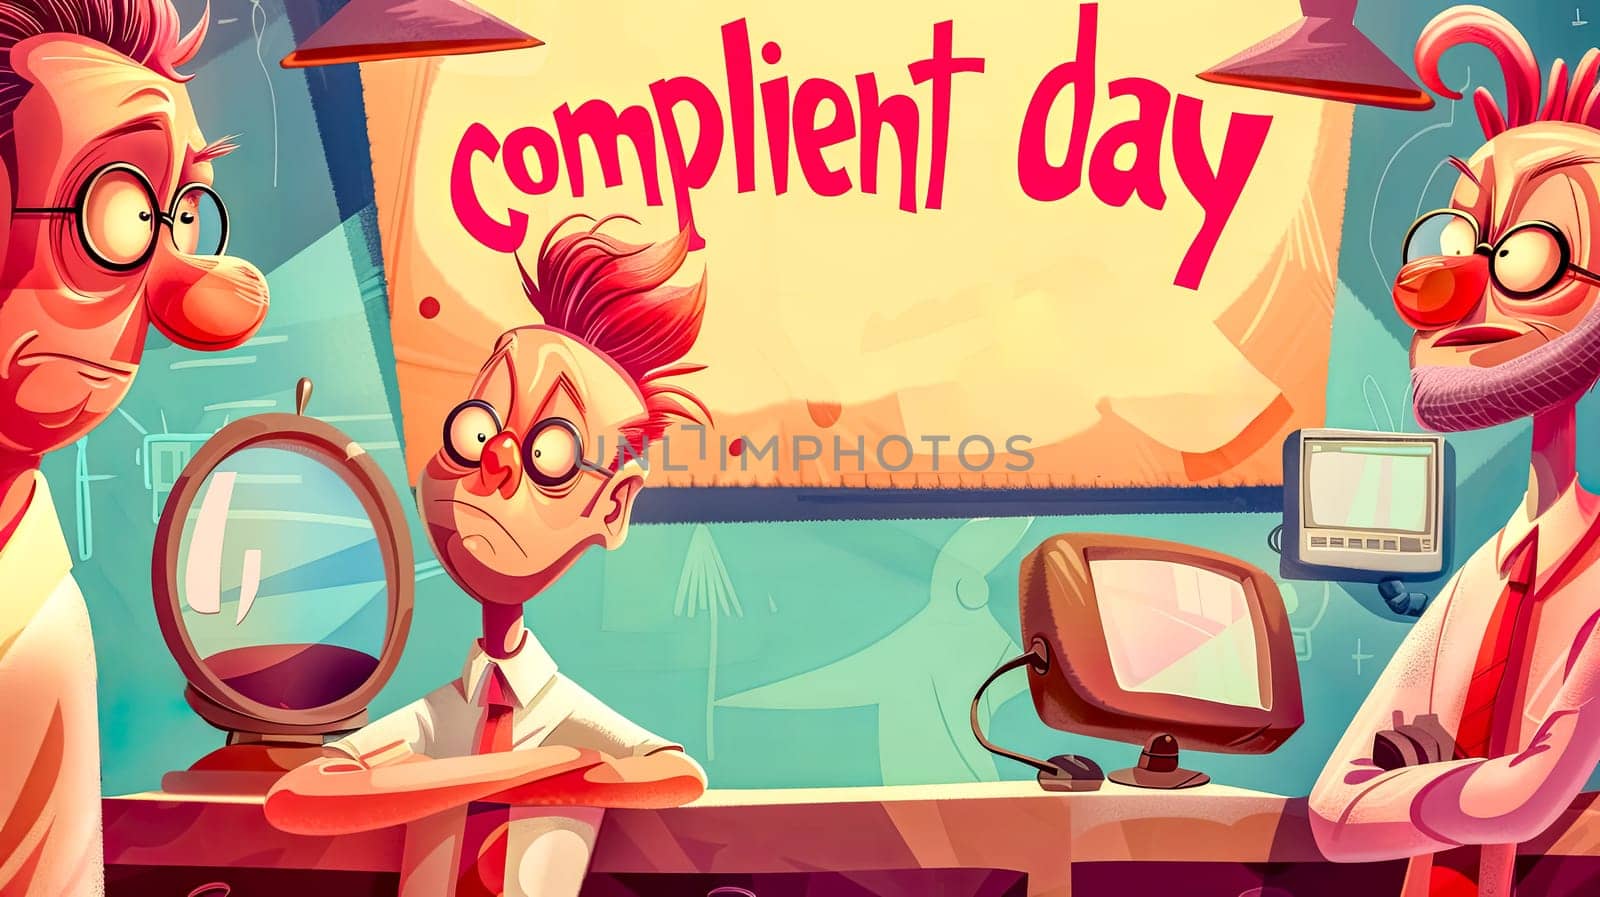 Colorful cartoon illustration of an office scene on compliment day, with two characters reacting